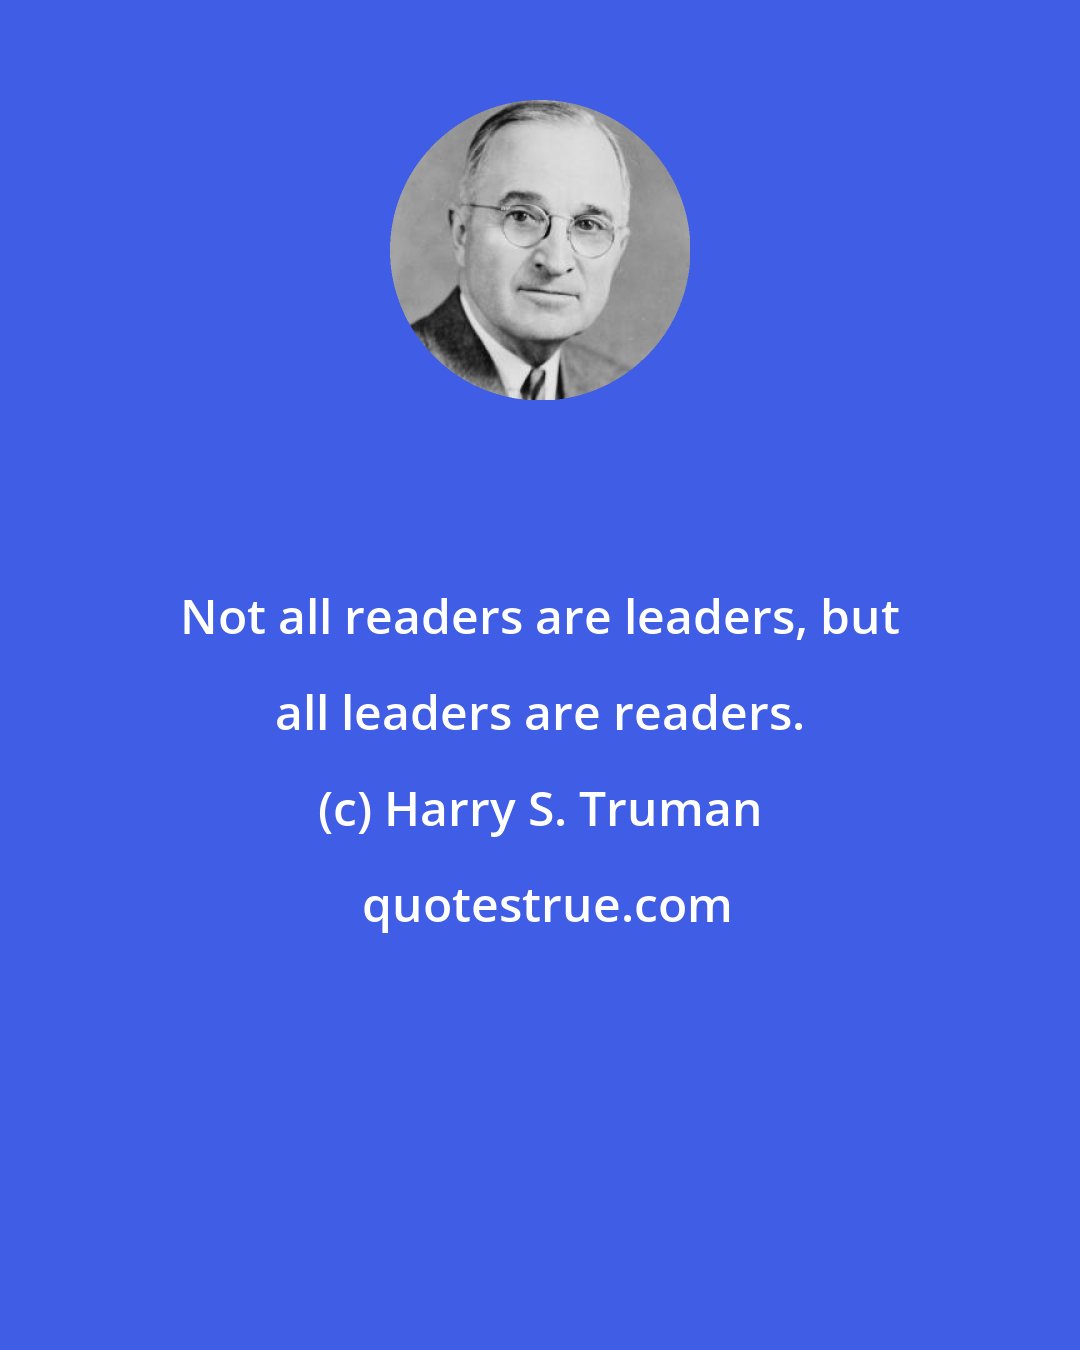 Harry S. Truman: Not all readers are leaders, but all leaders are readers.